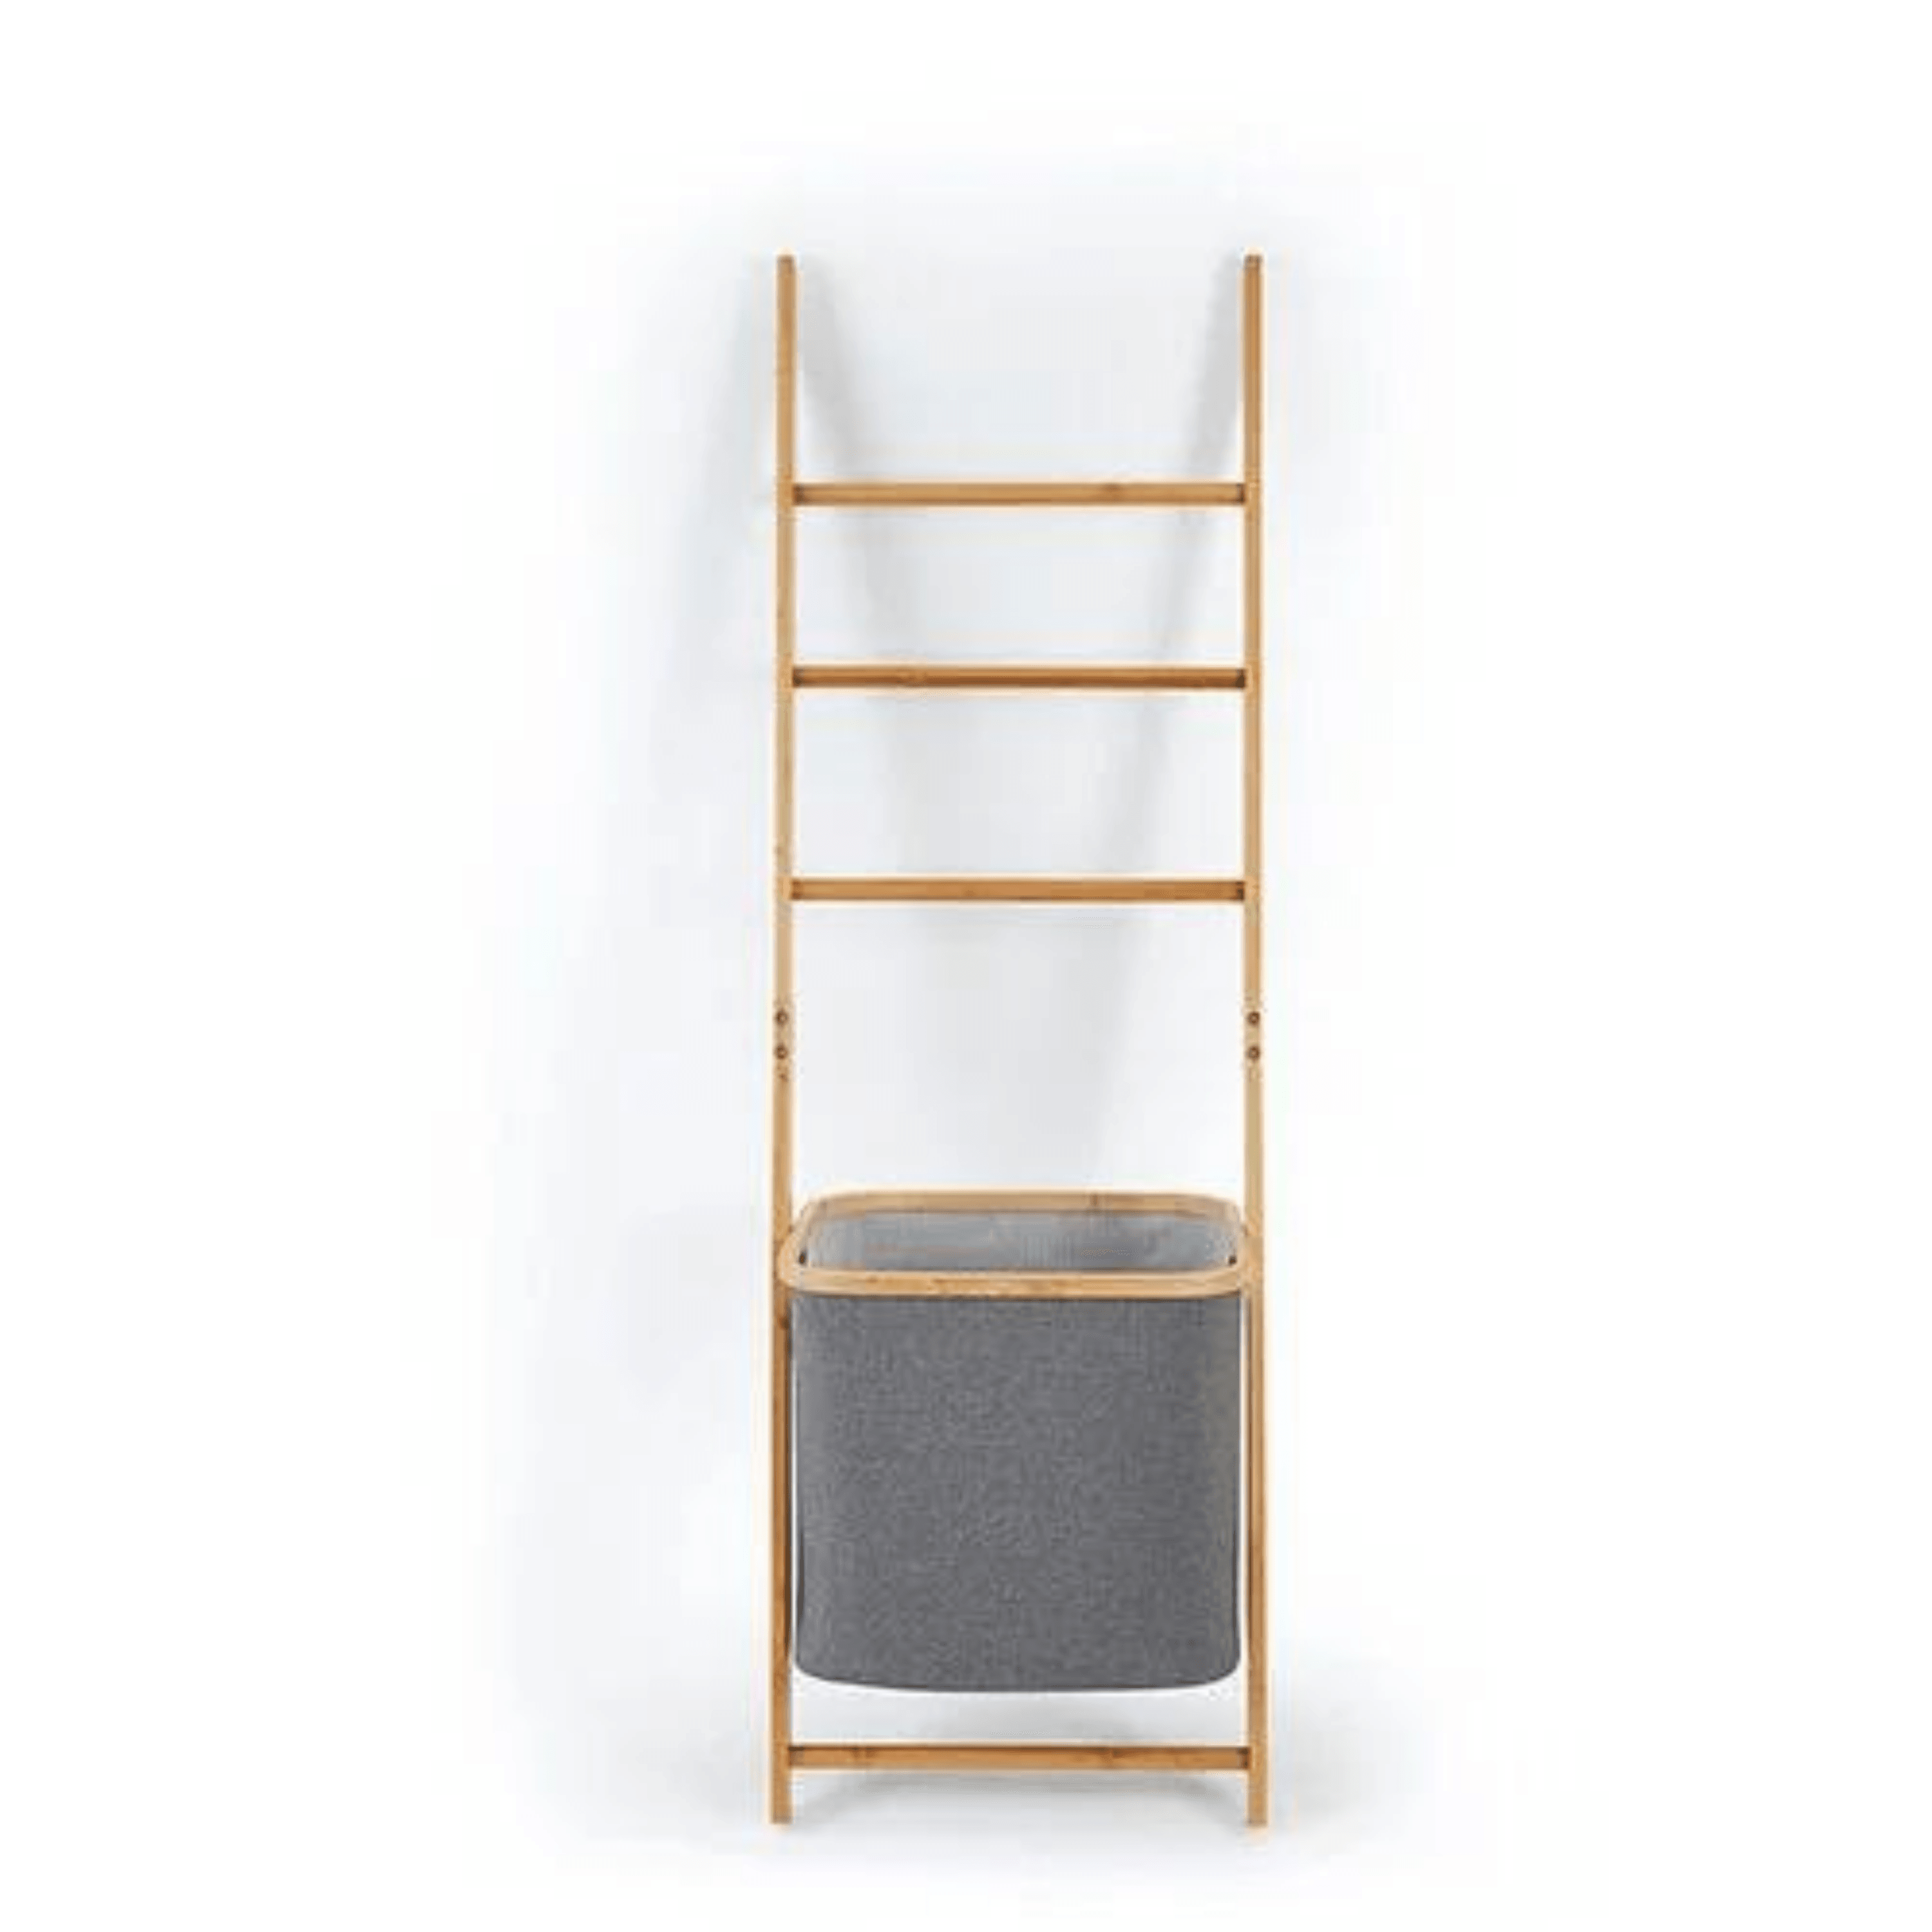 Luan Towel/Laundry Ladder with removable Laundry Hamper GREY